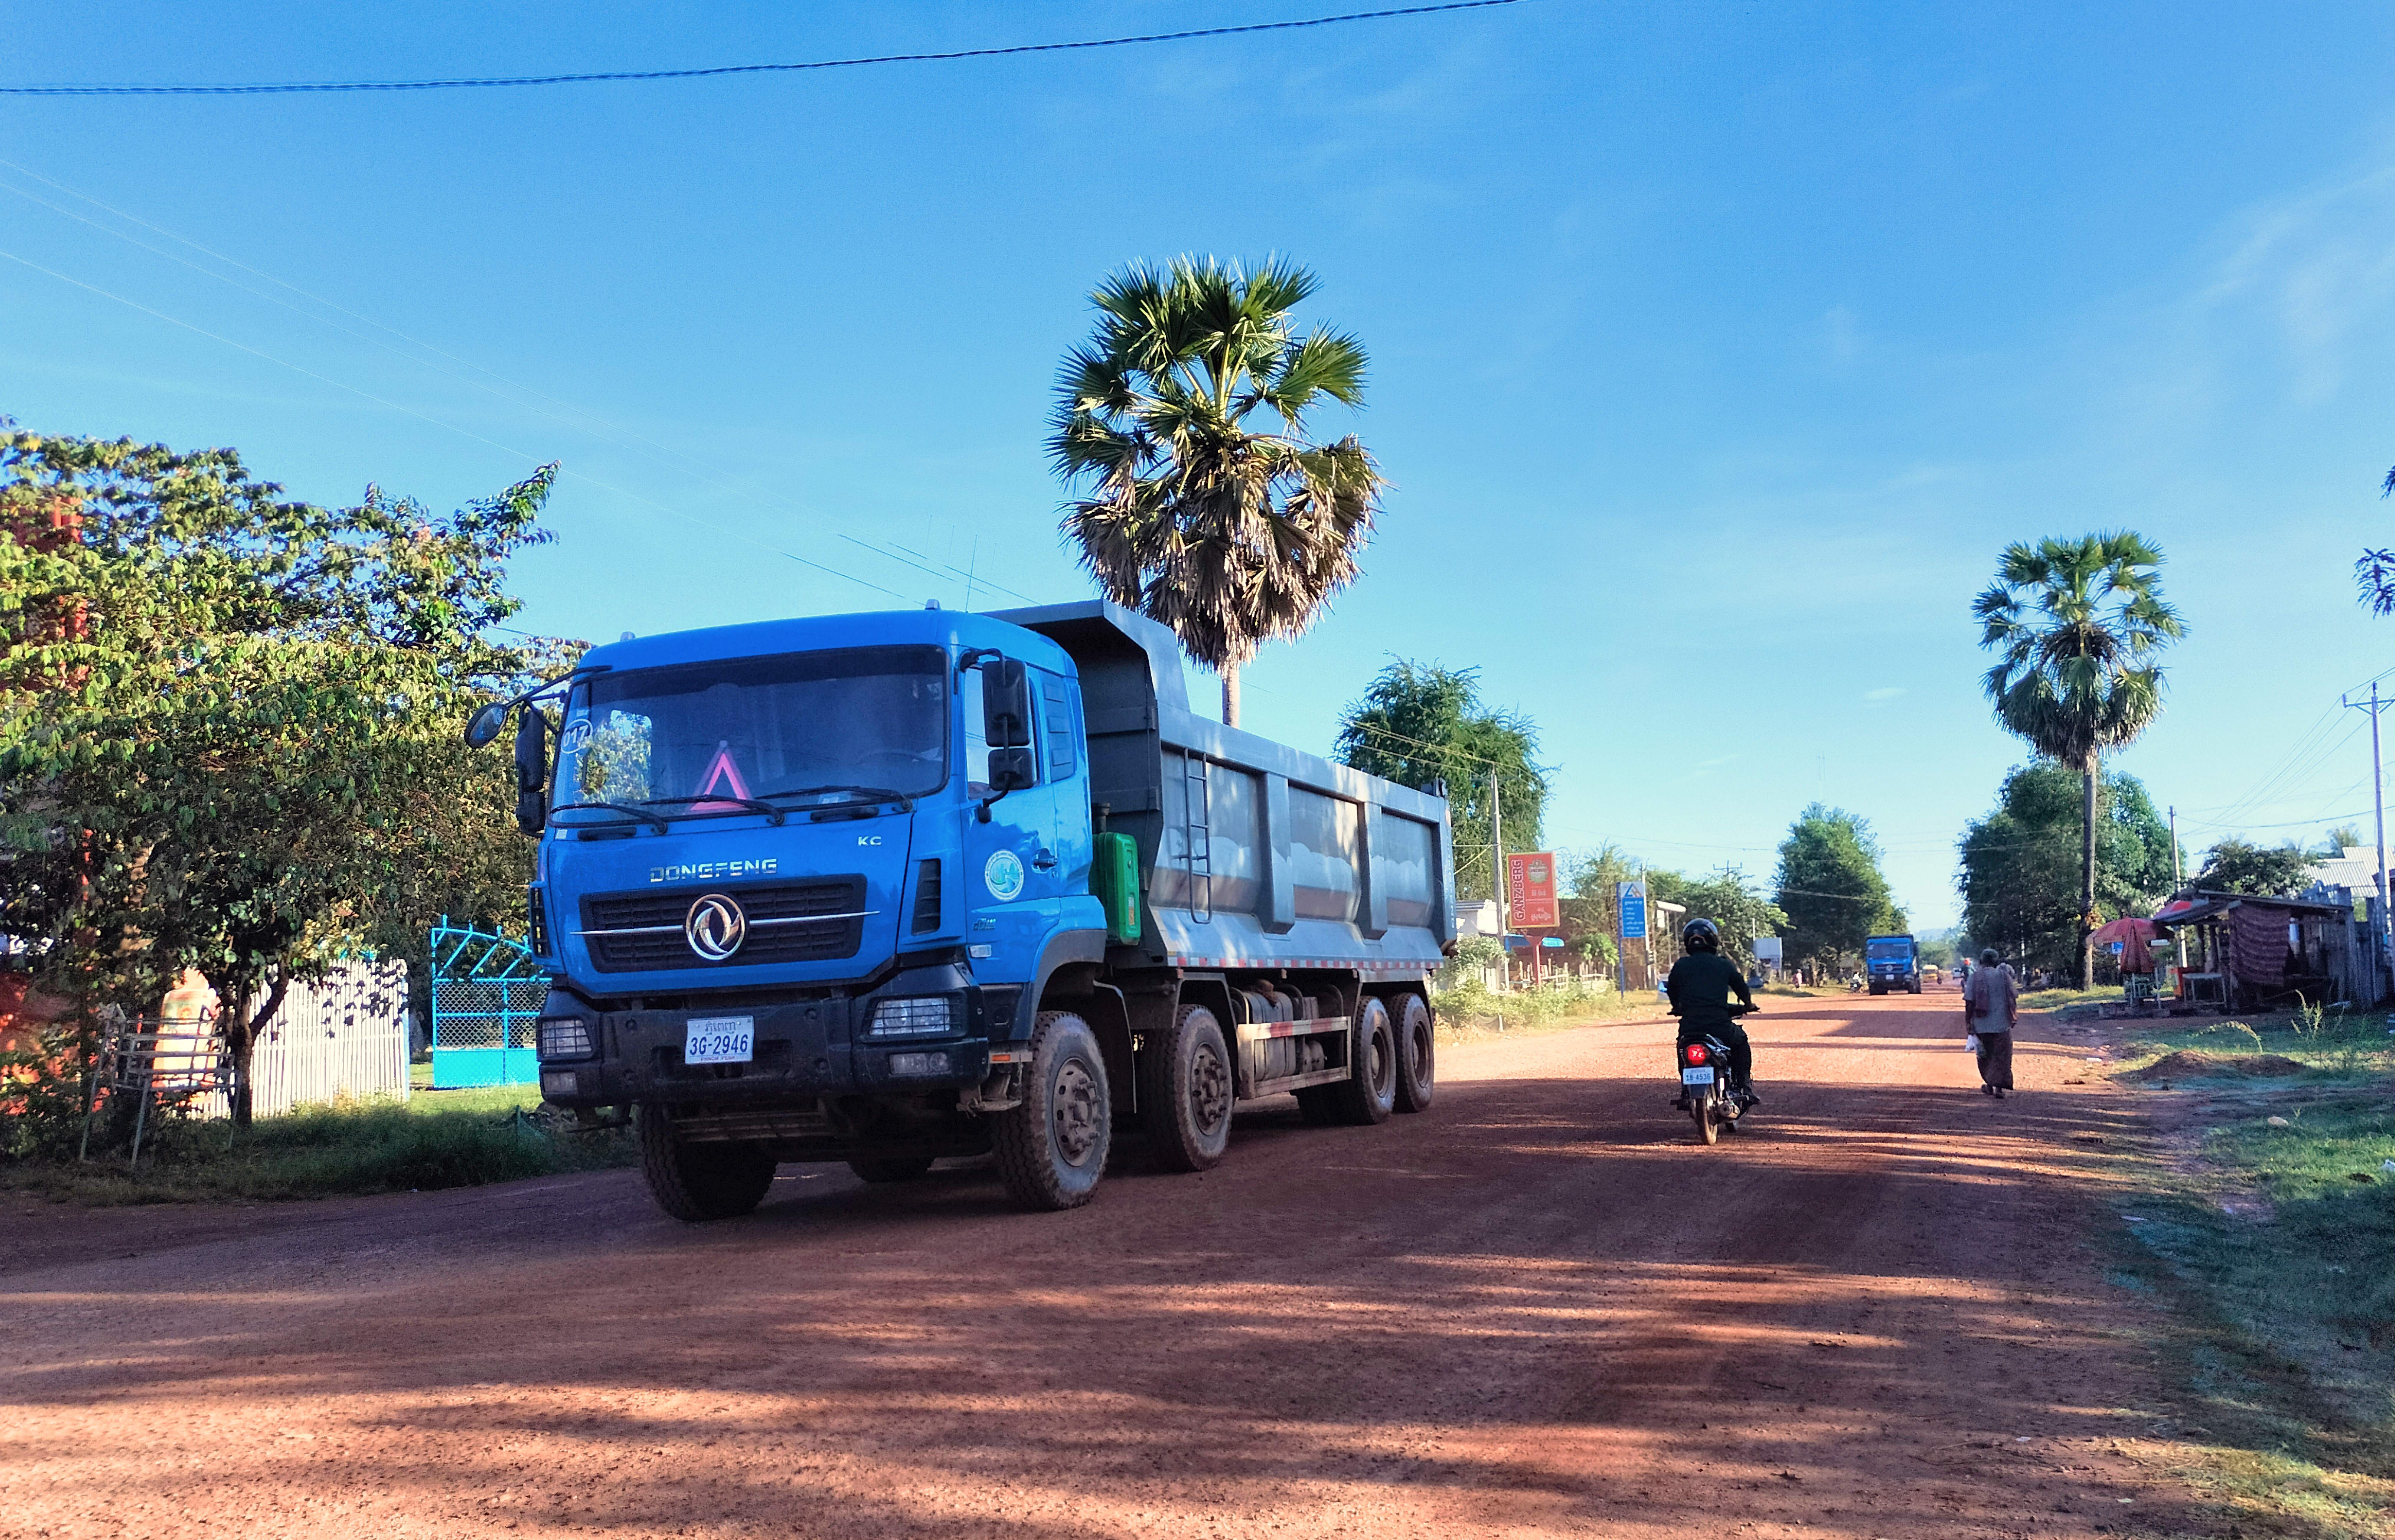 Trucks bearing Global Green's logo stuck to the side of the door have destroyed roads across Preah Vihear province as they carry iron ore from protected areas to Try Pheap's port in Kampong Chhnang province. Image by Gerald Flynn / Mongabay.